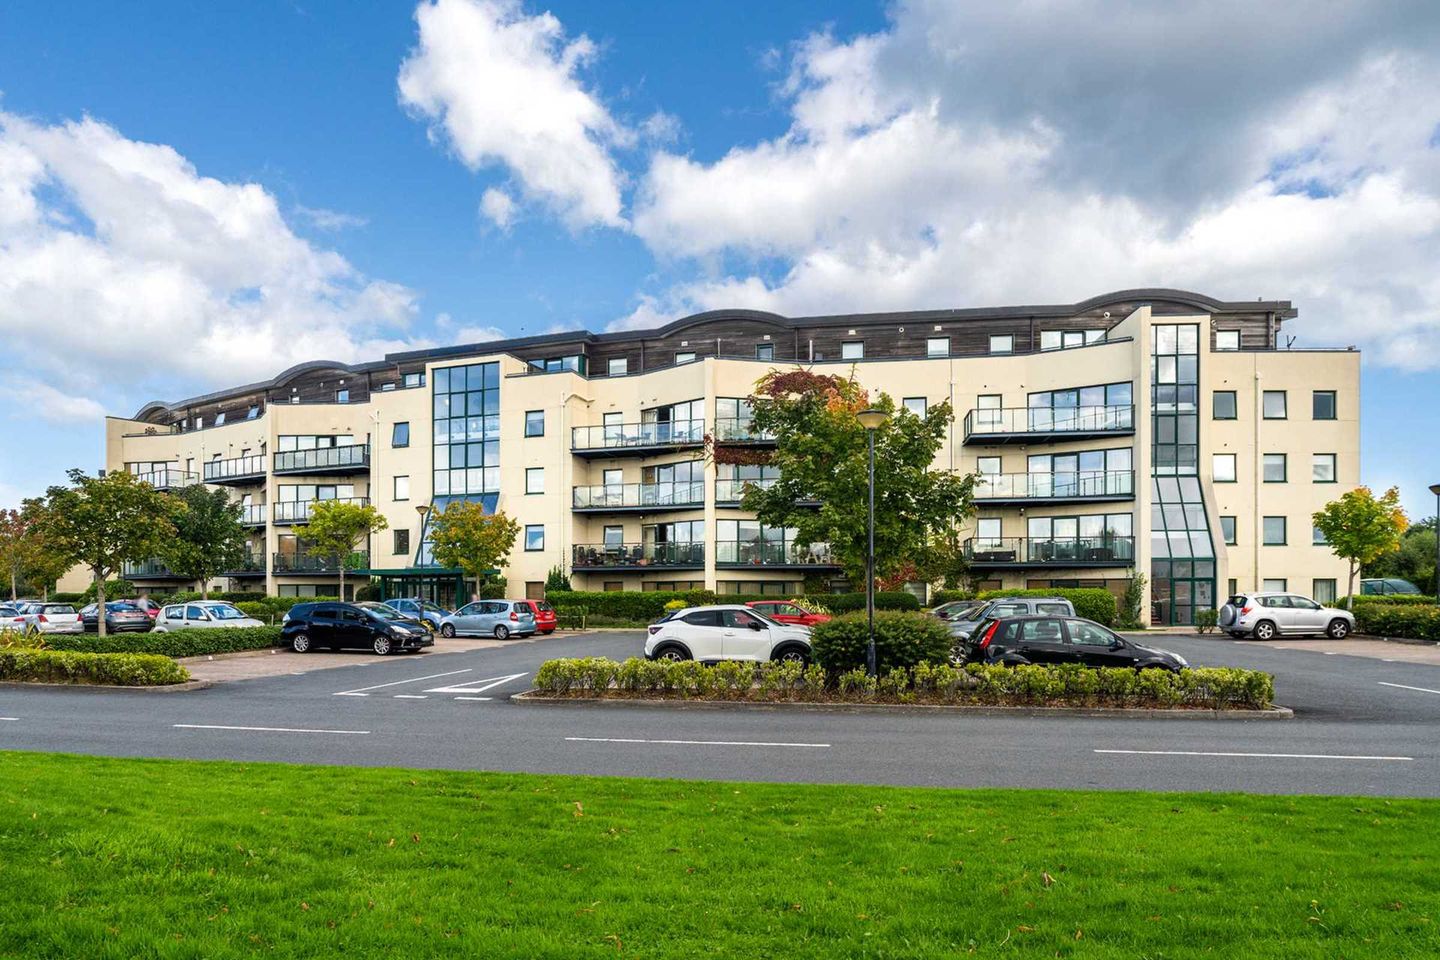 89 The Concordia, Seabourne View, Greystones, Co. Wicklow, A63YF82